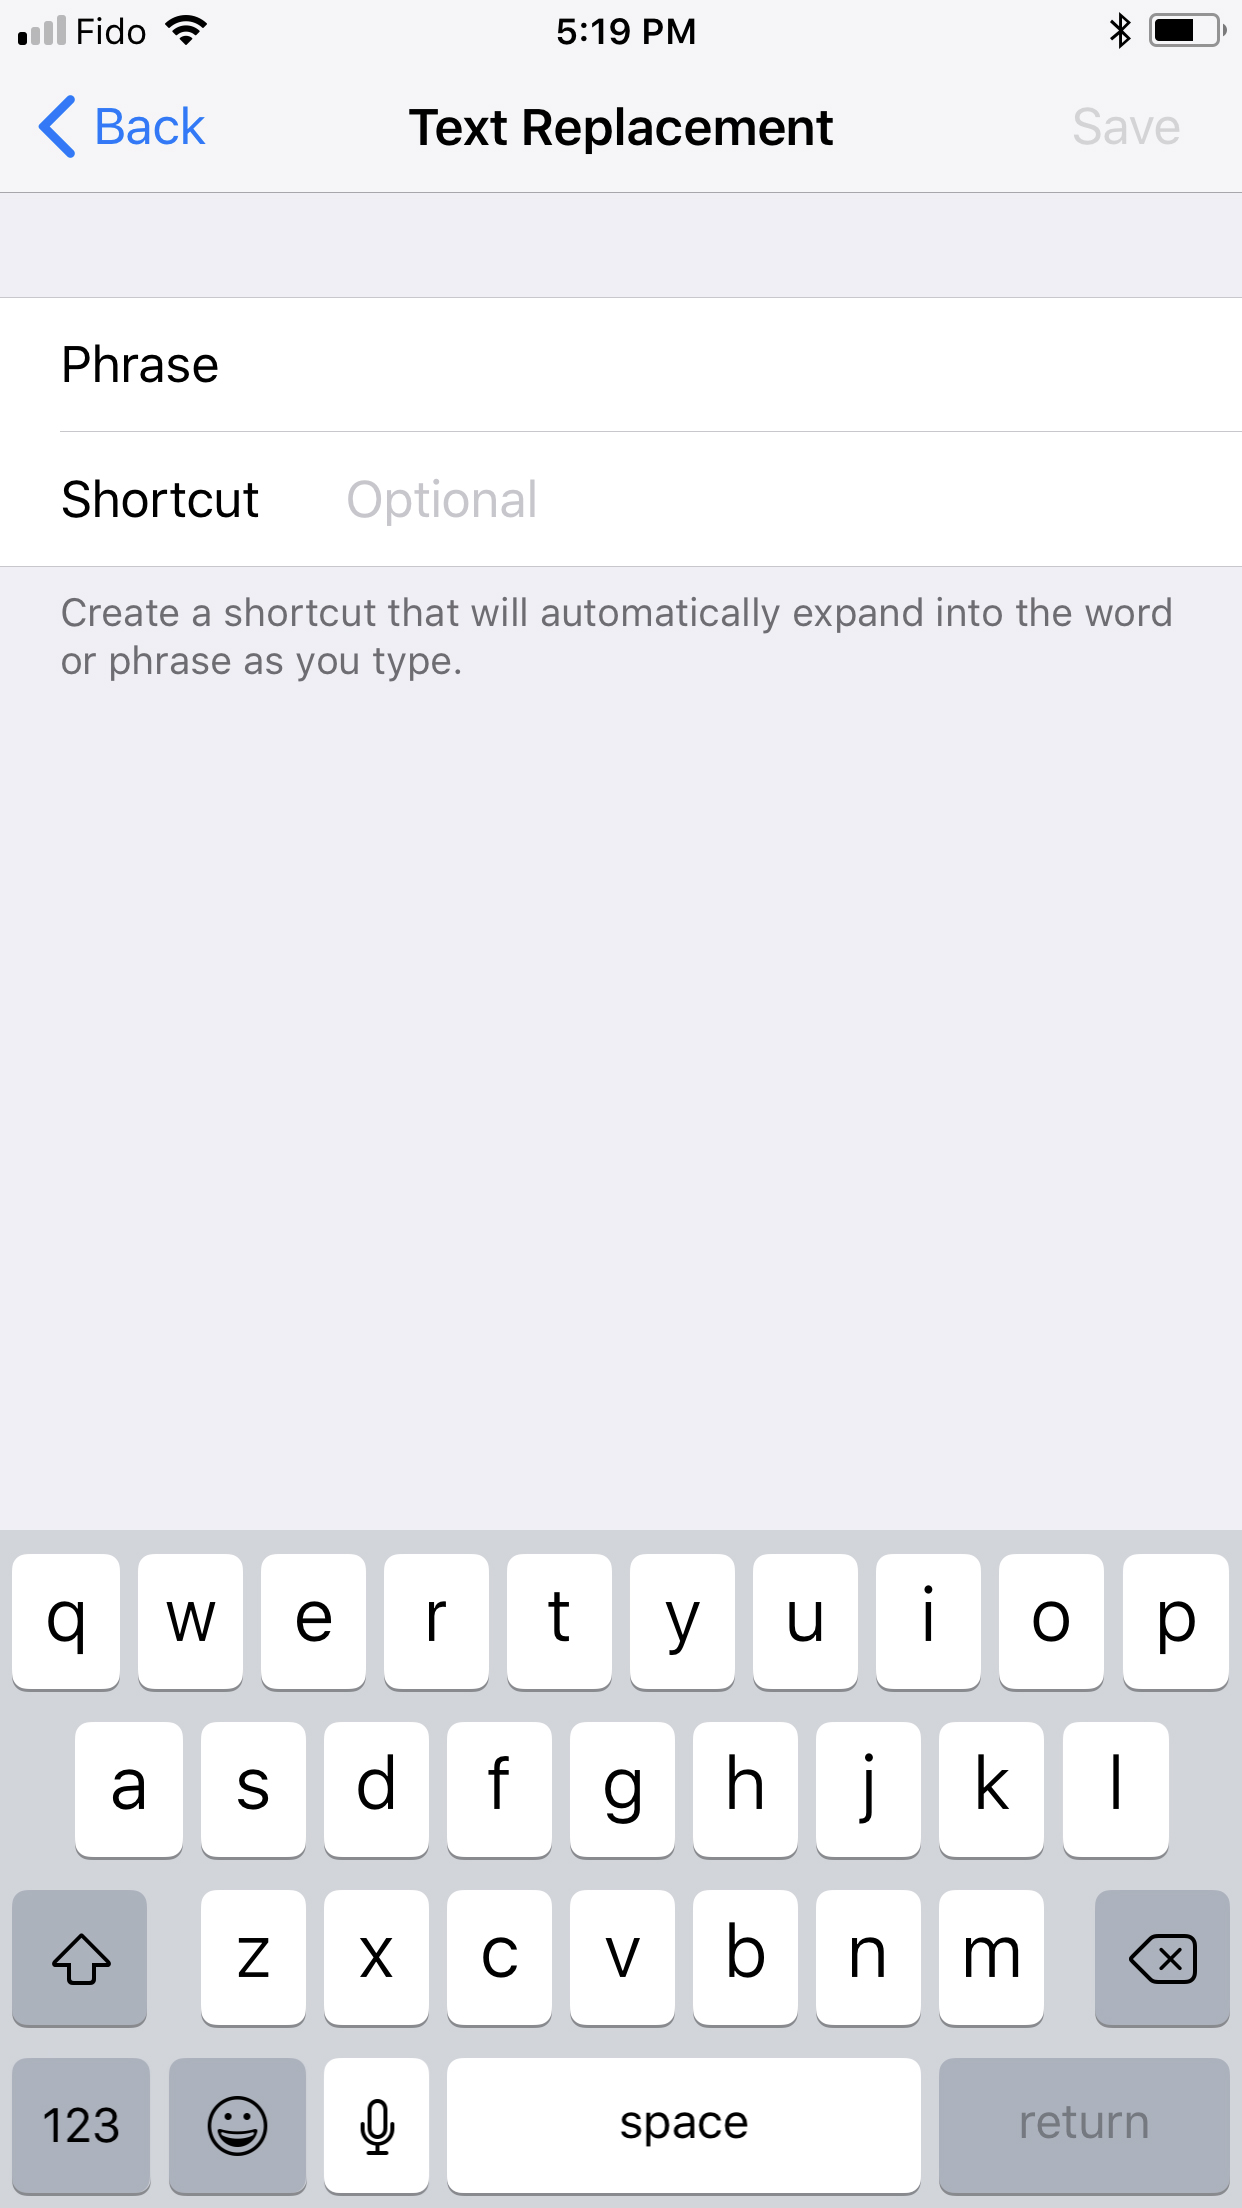 Apple Will Soon Move Text Replacements to CloudKit for Better Syncing Between Devices